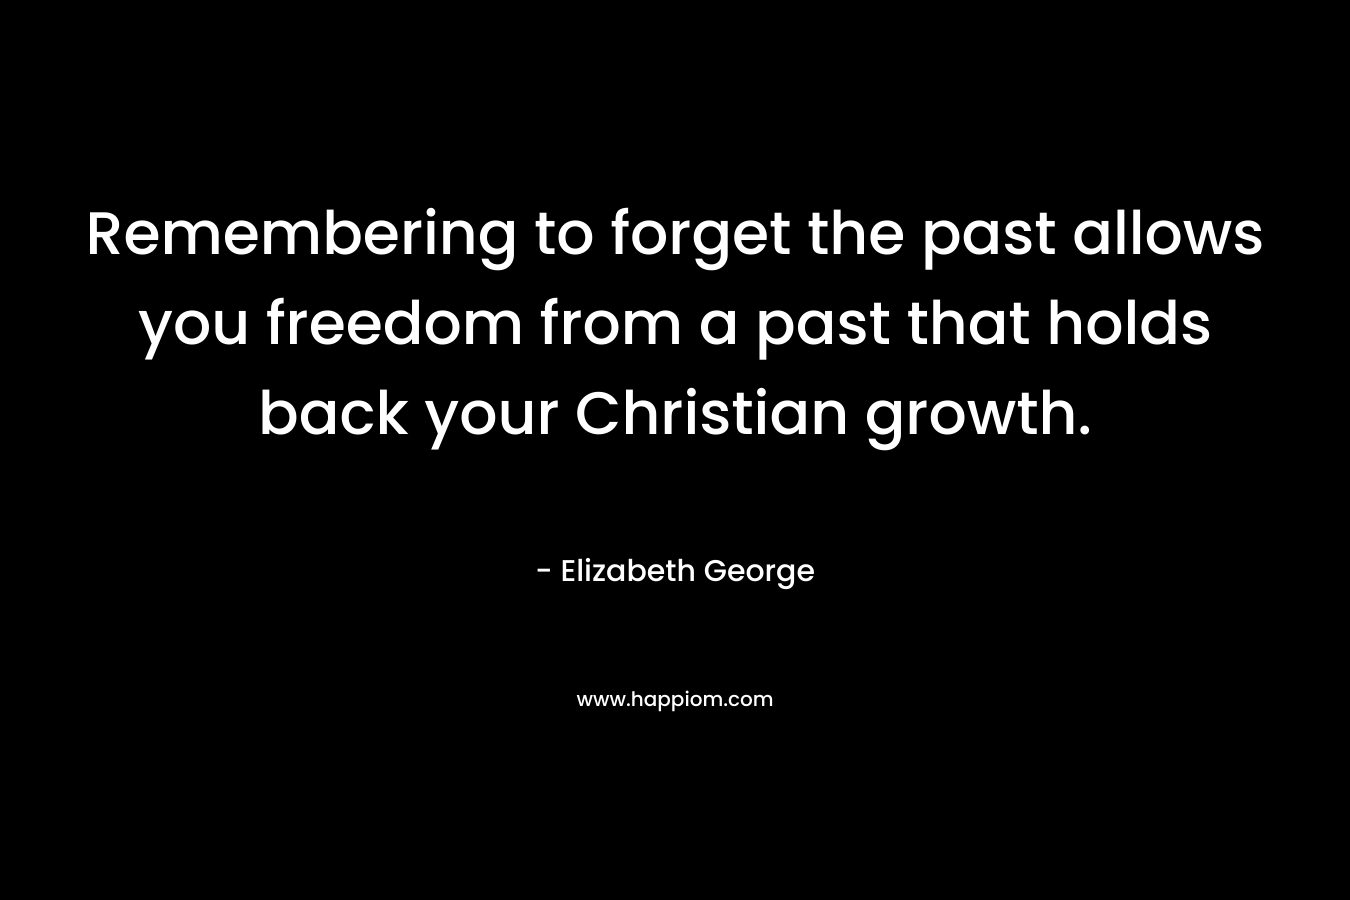 Remembering to forget the past allows you freedom from a past that holds back your Christian growth.